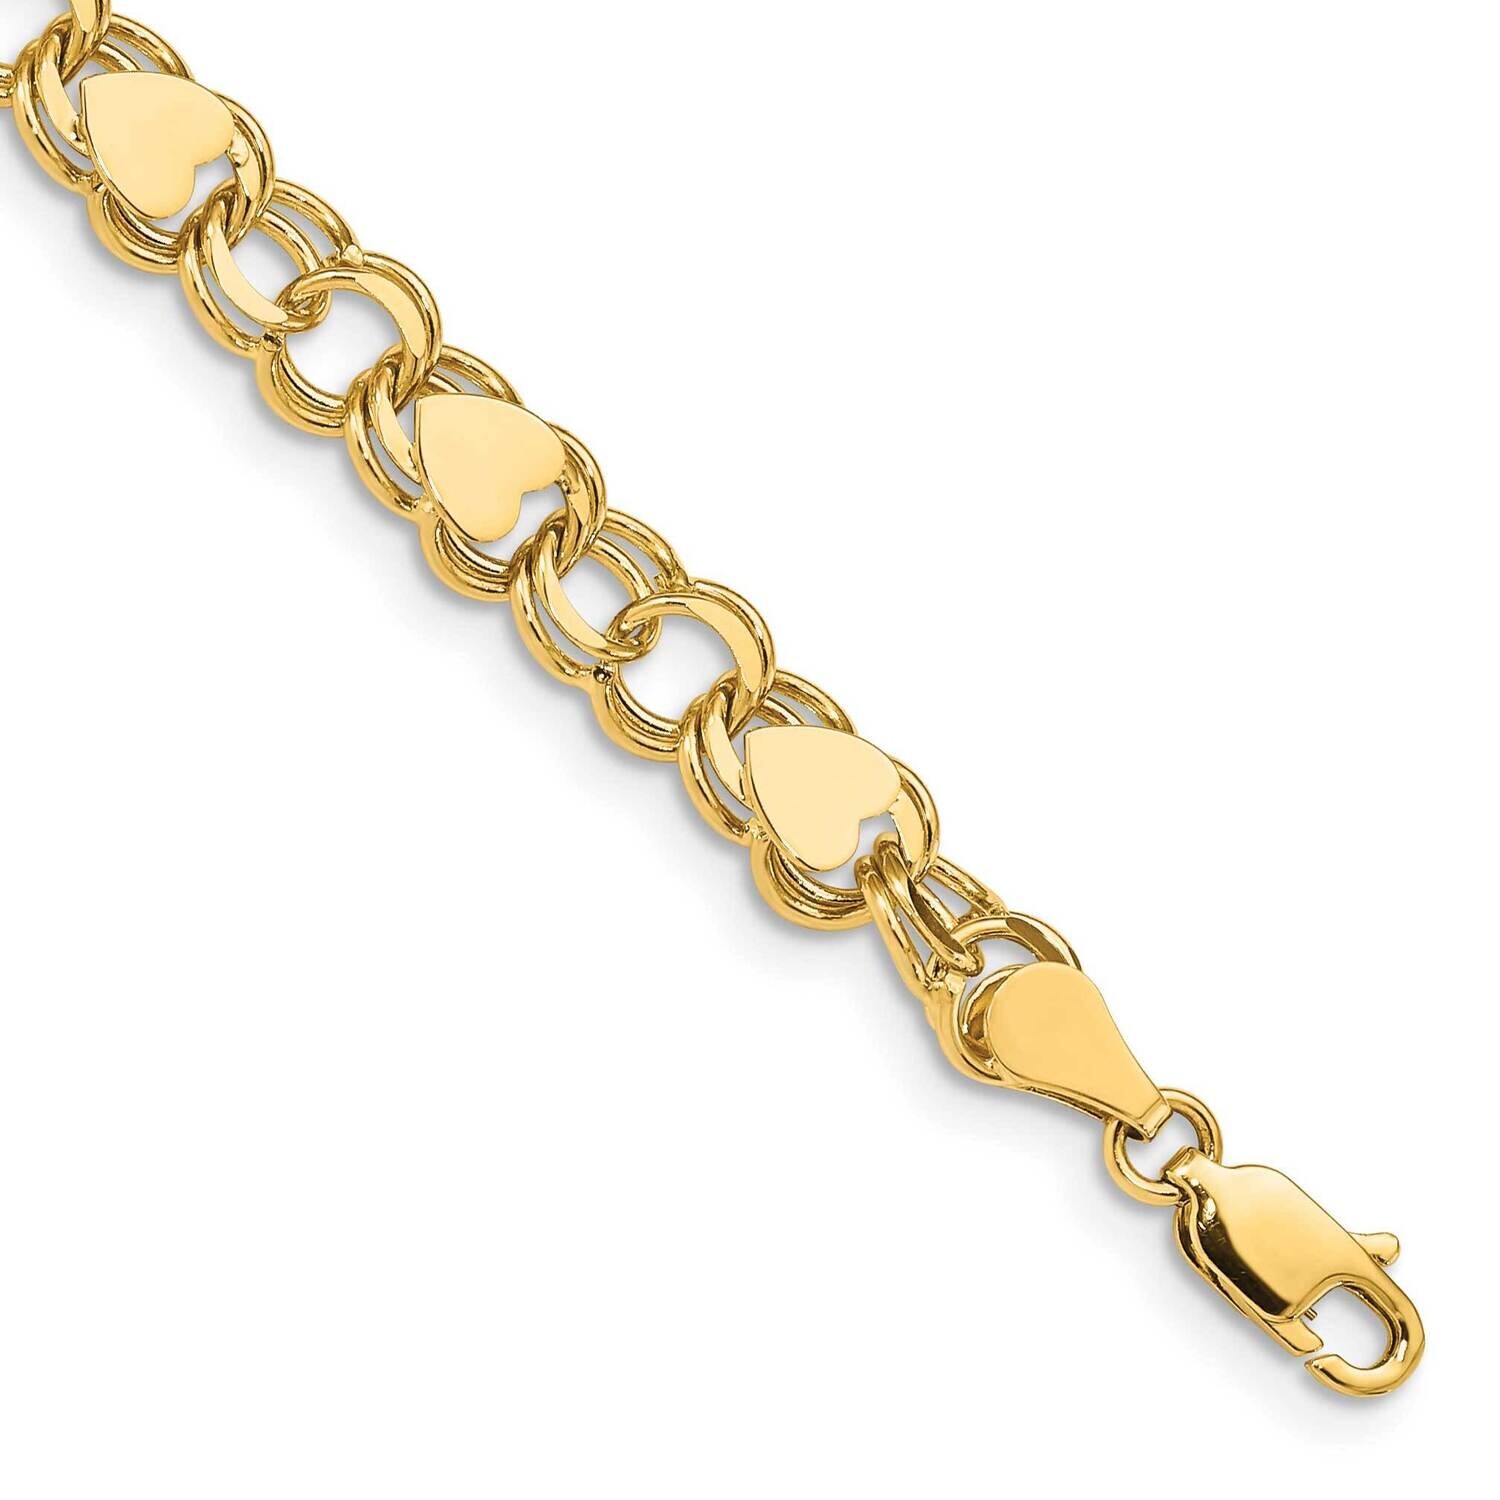 Double Link with Hearts Charm Bracelet 7 Inch 14k Gold DO501-7